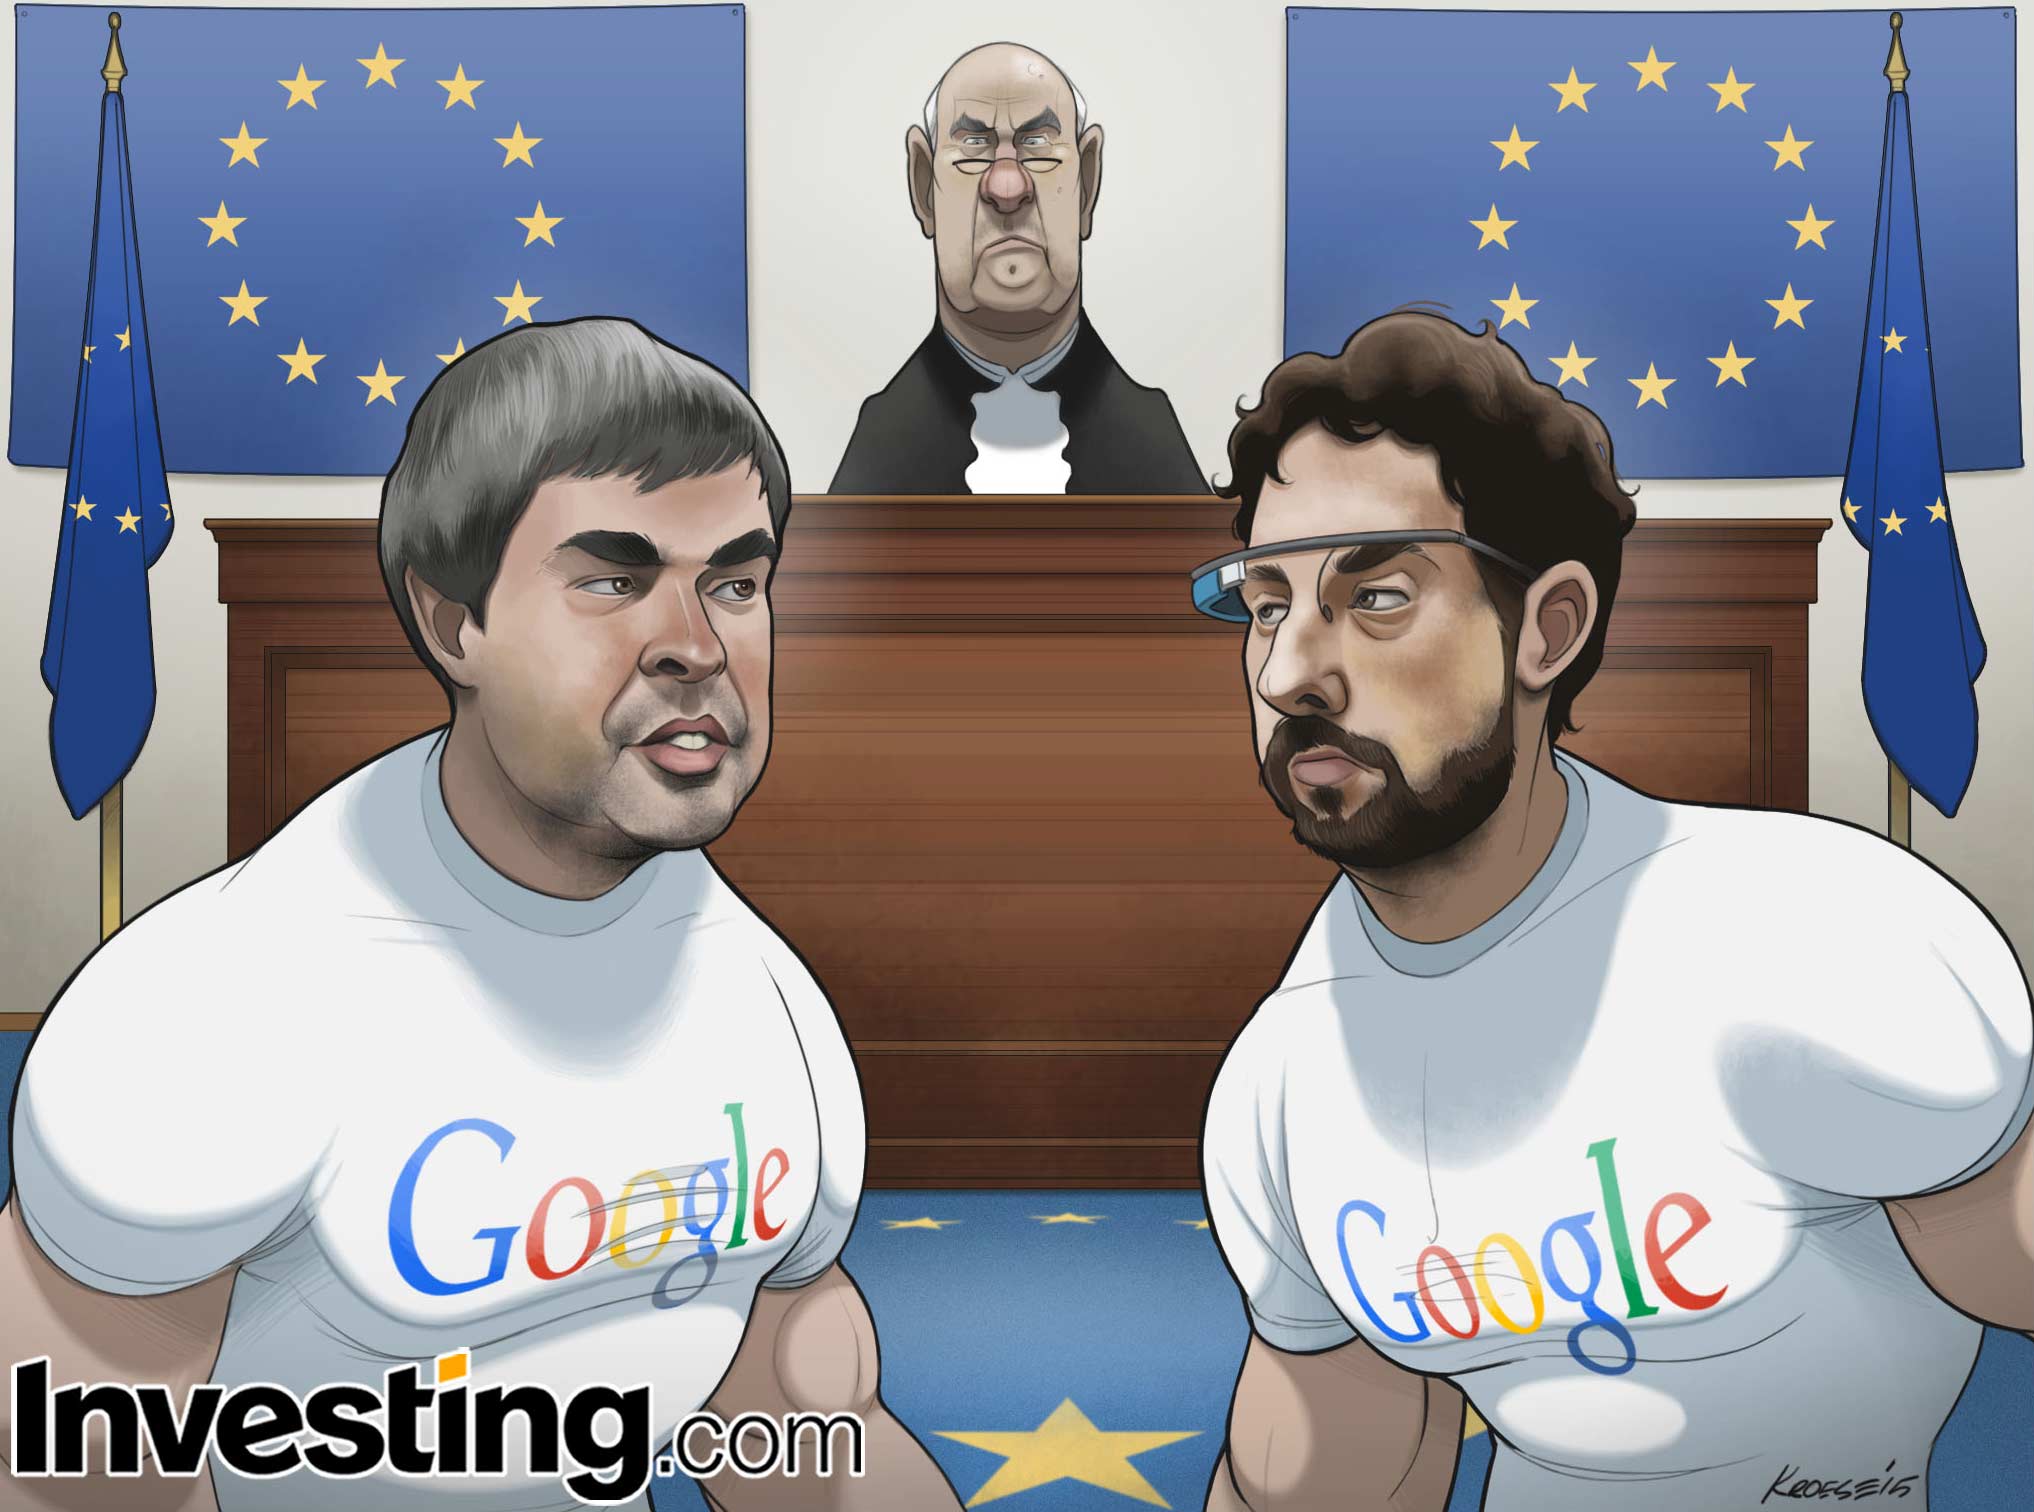 How will the European Union's anti-trust charges against Google affect the company's stock performance?